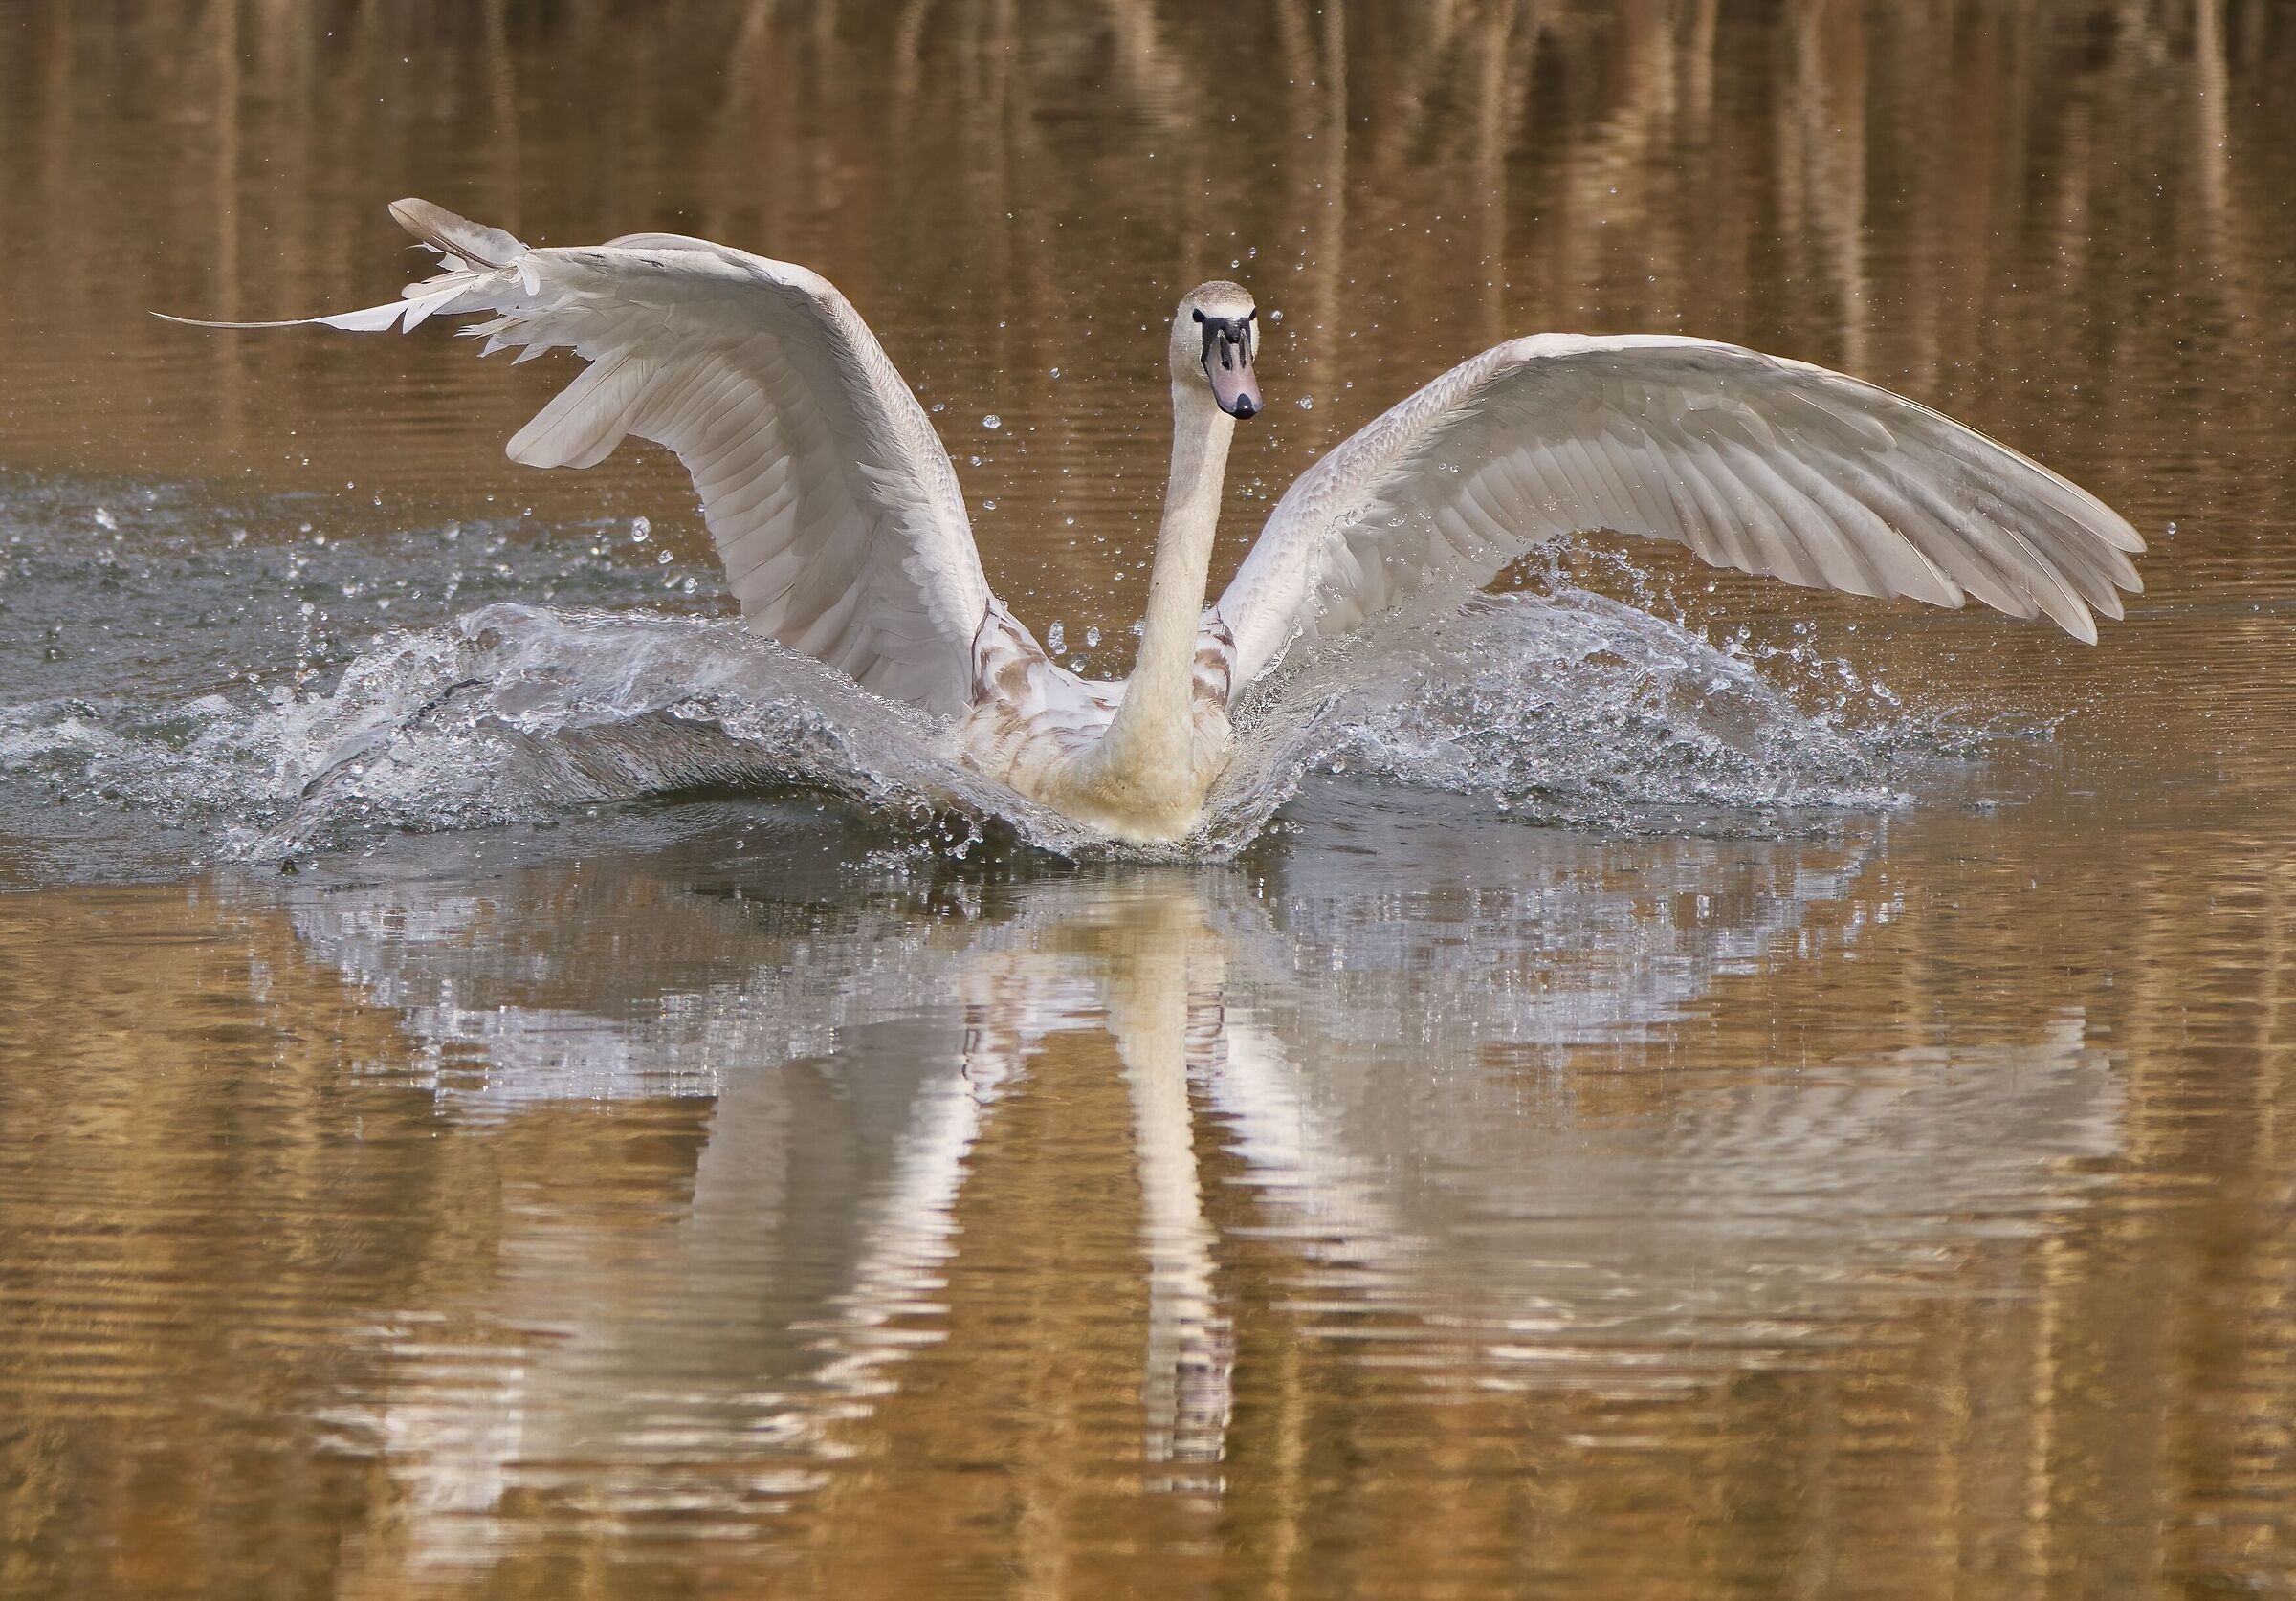 The spectacular landing of the swan ...